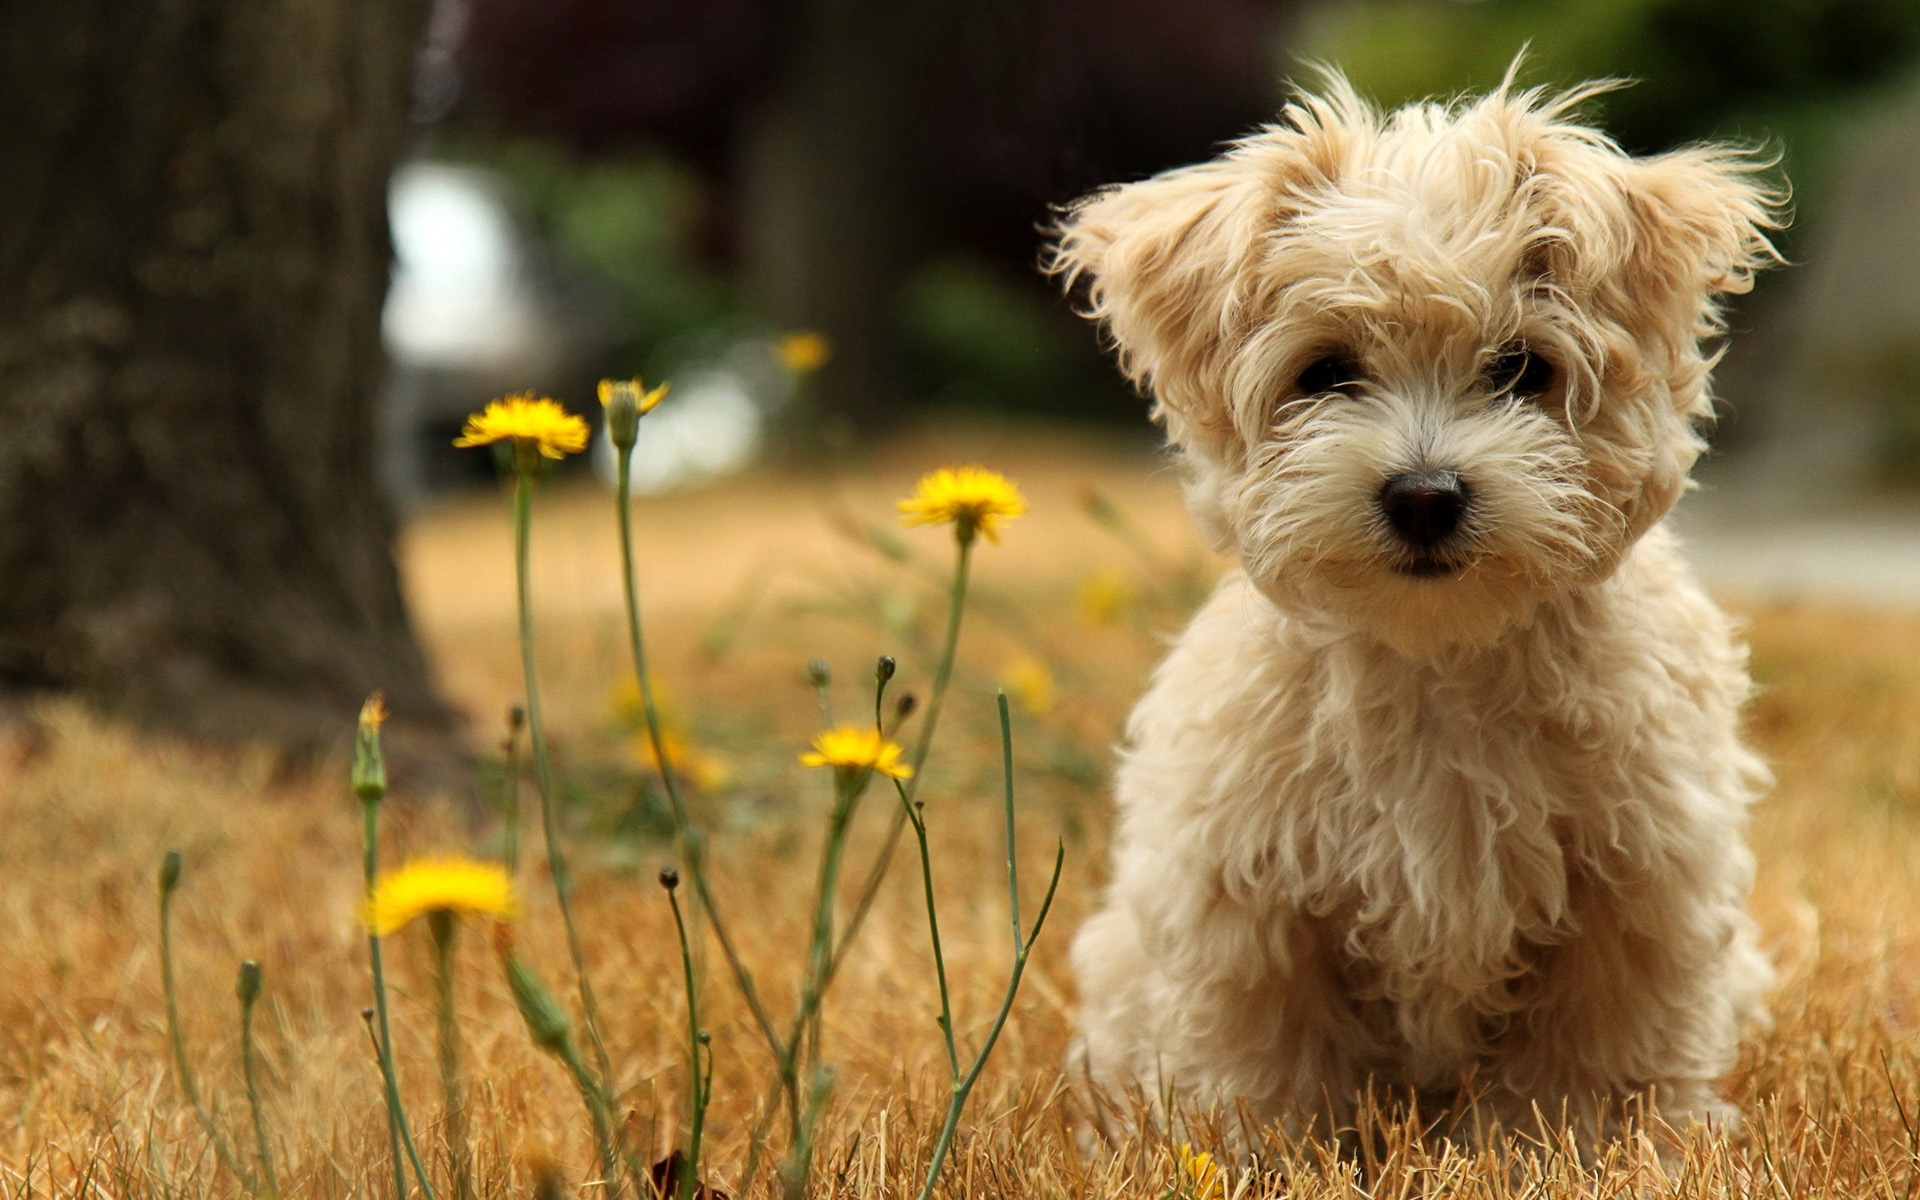 Free download Cute Animal Wallpapers Hd Amazing With Image Of Cute ...